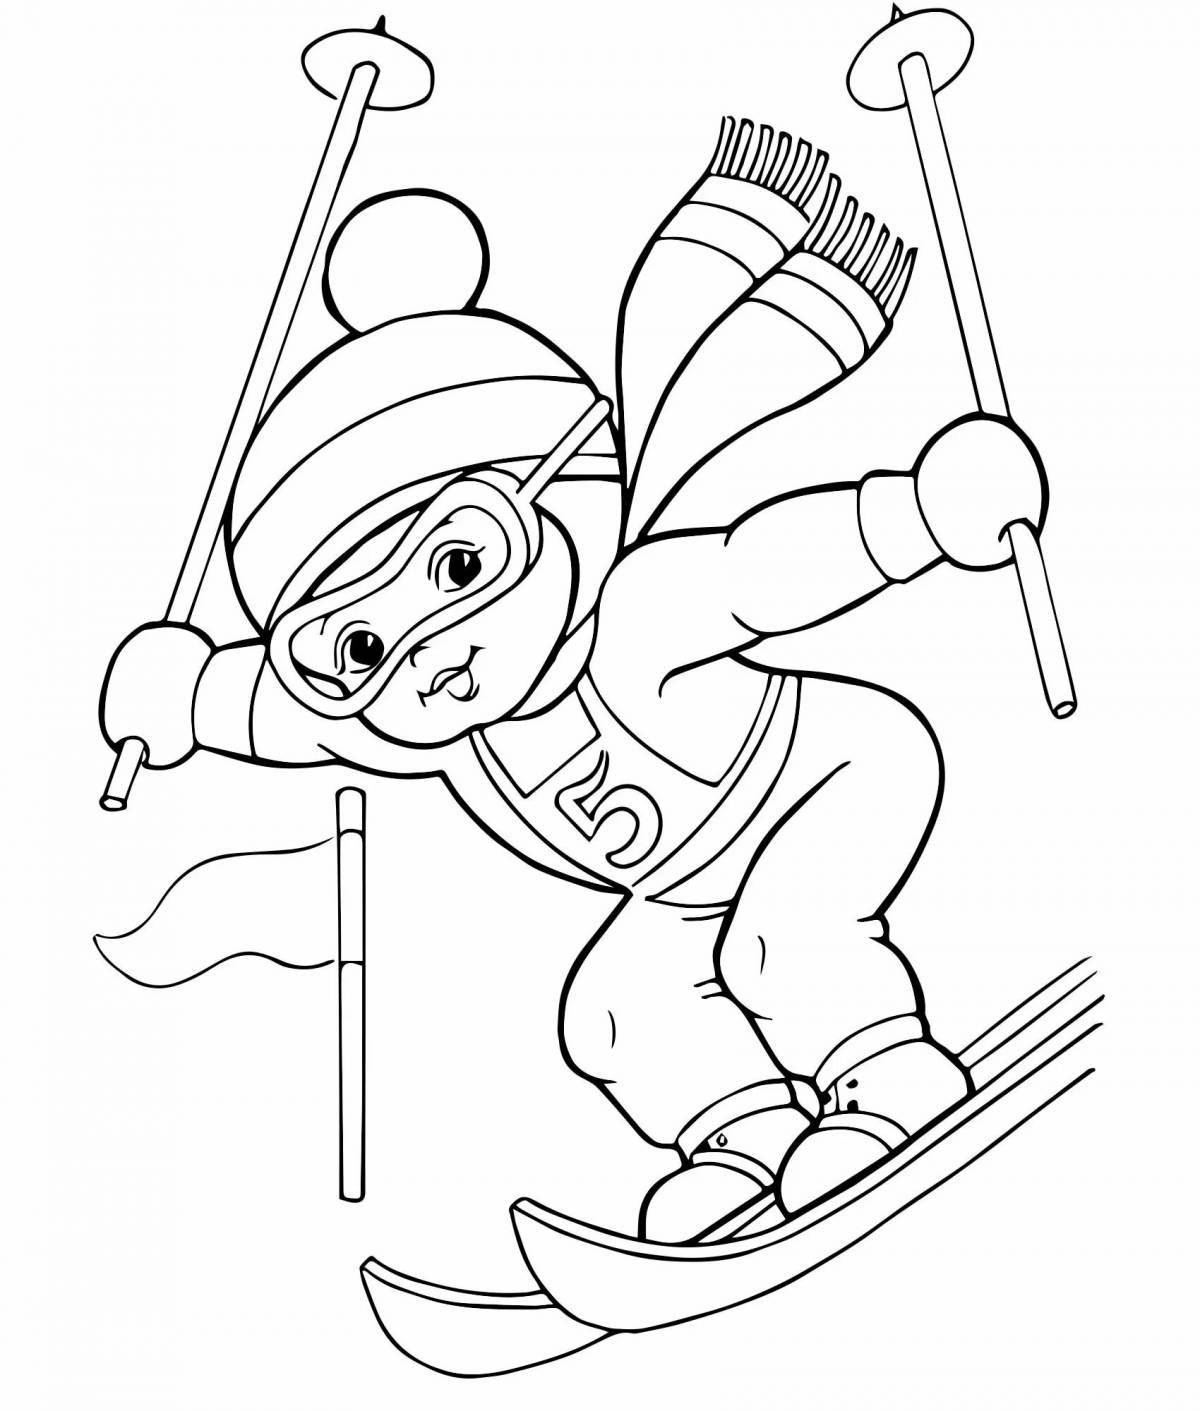 Fearless skier coloring page